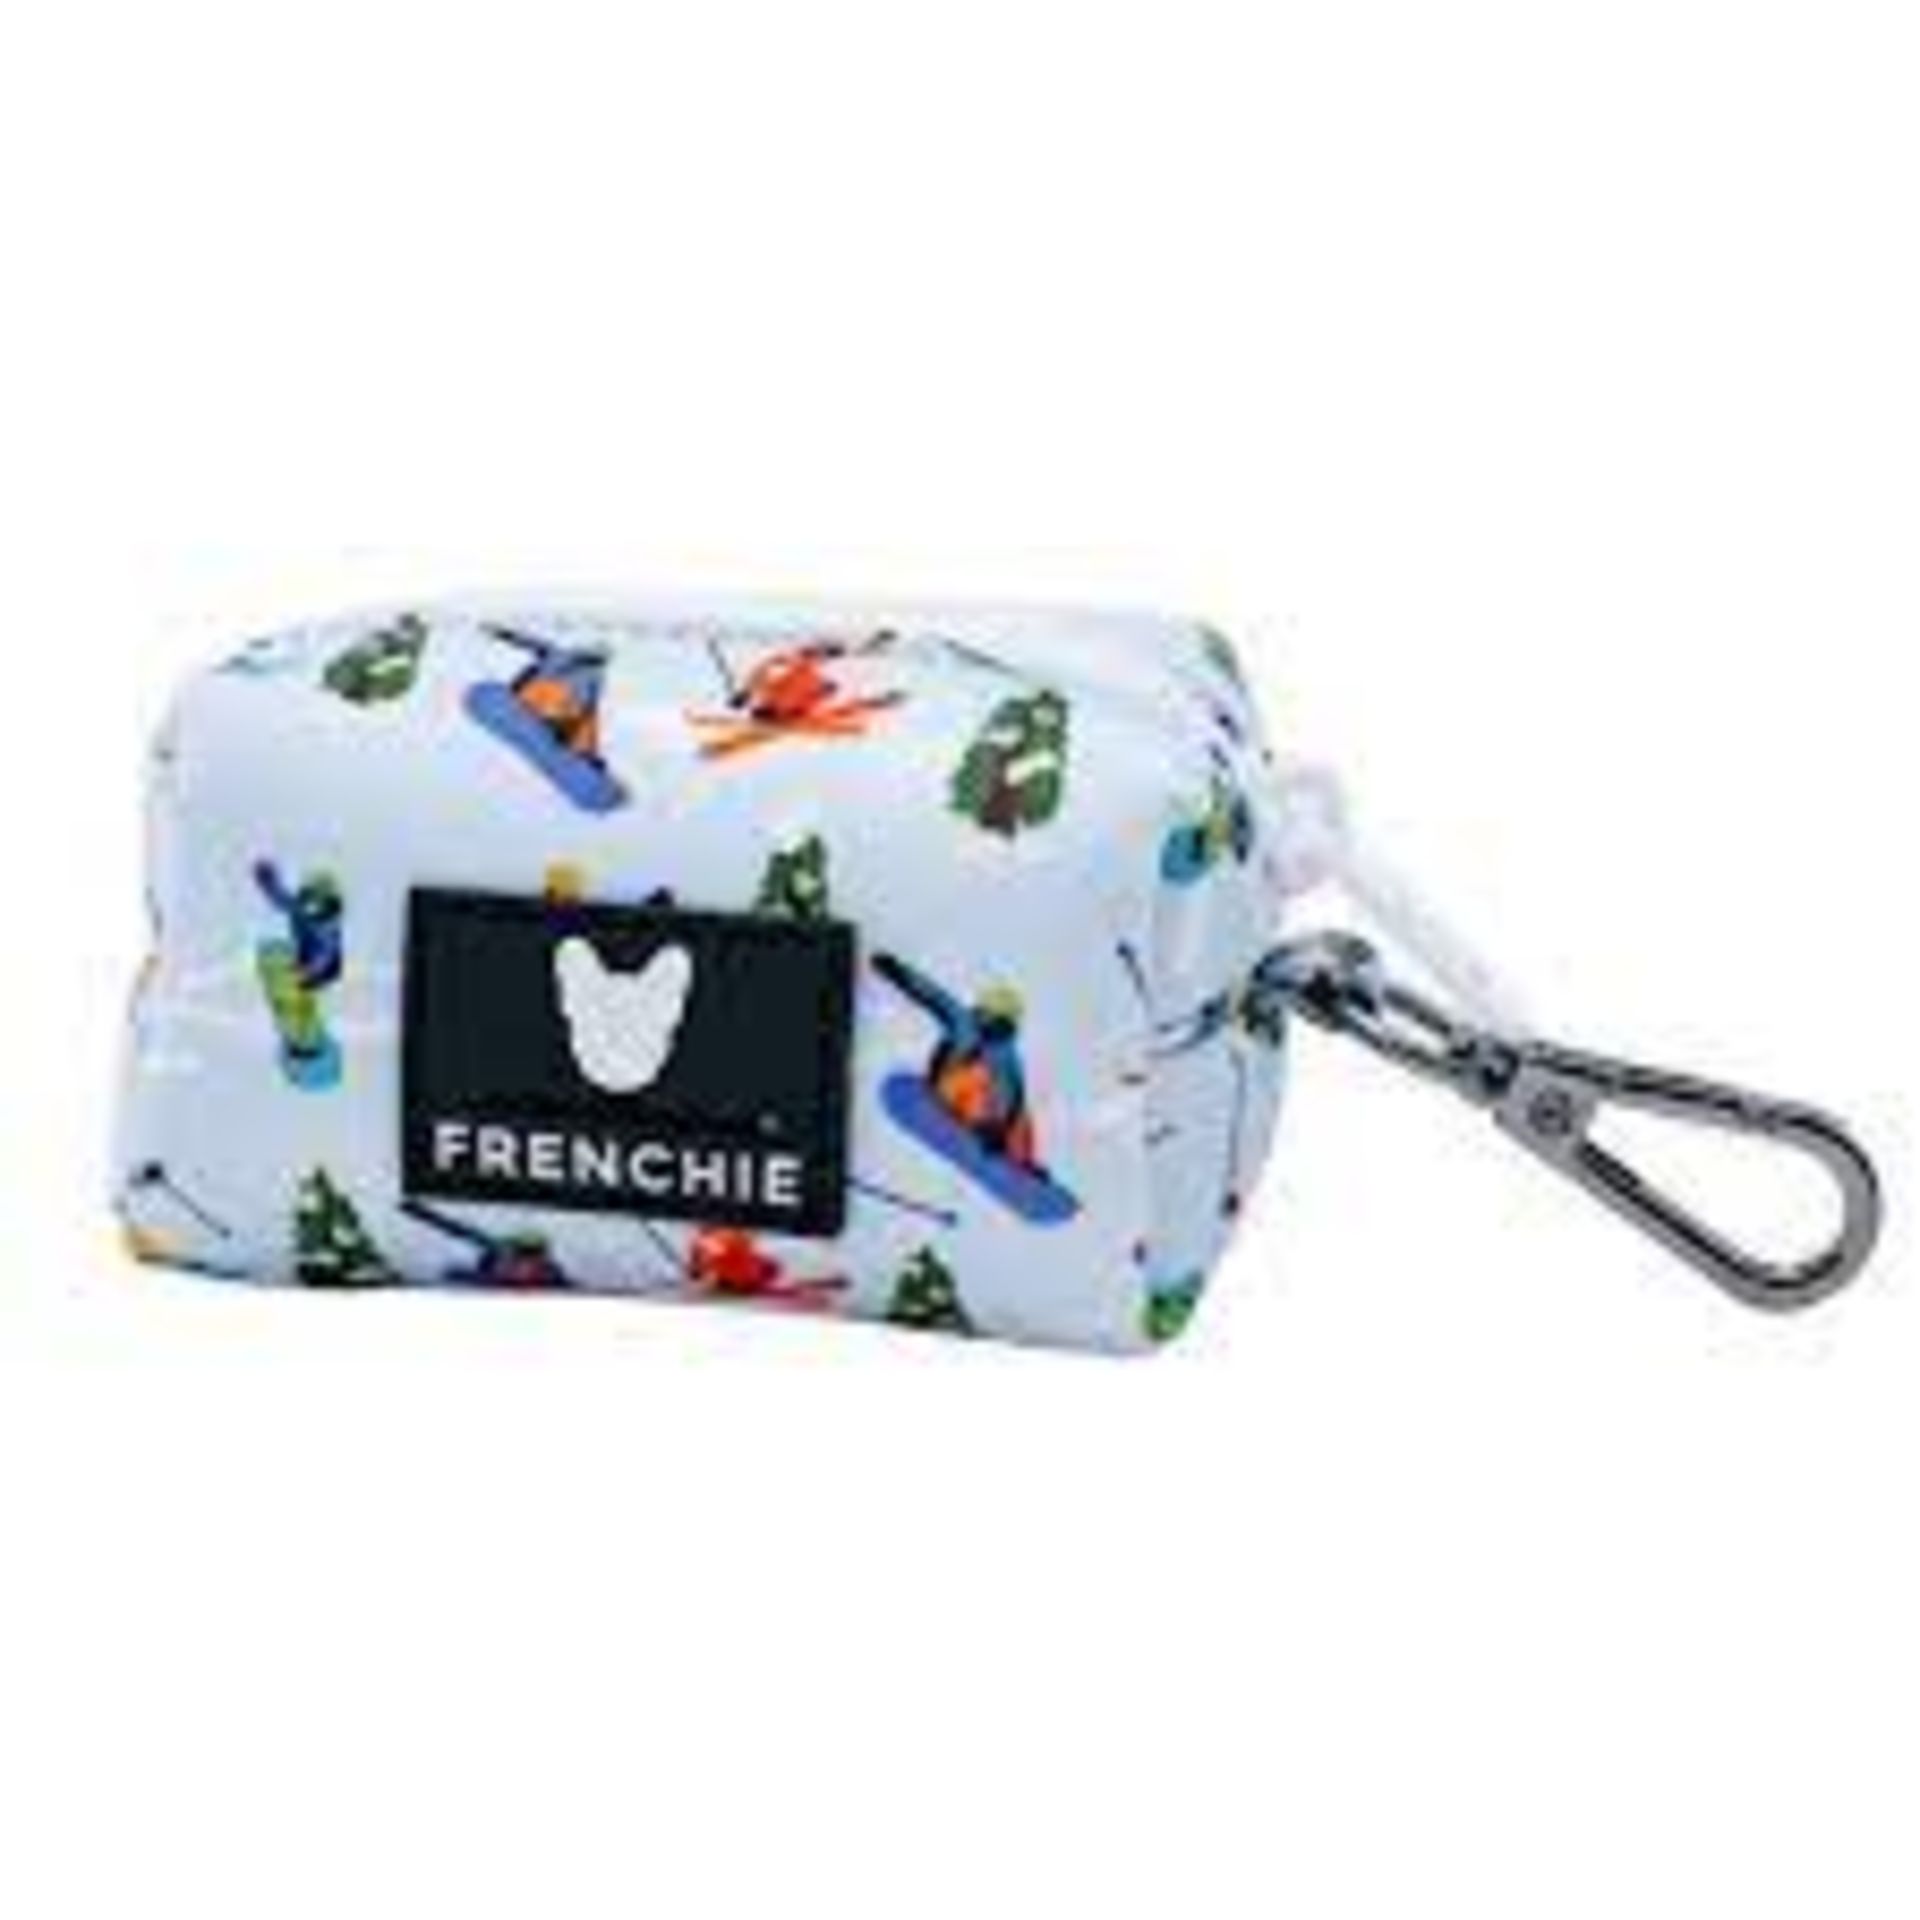 Bulk Trade Lot 500 X New & Packaged Frenchie The Bulldog Luxury Branded Dog Products. May include - Image 25 of 50